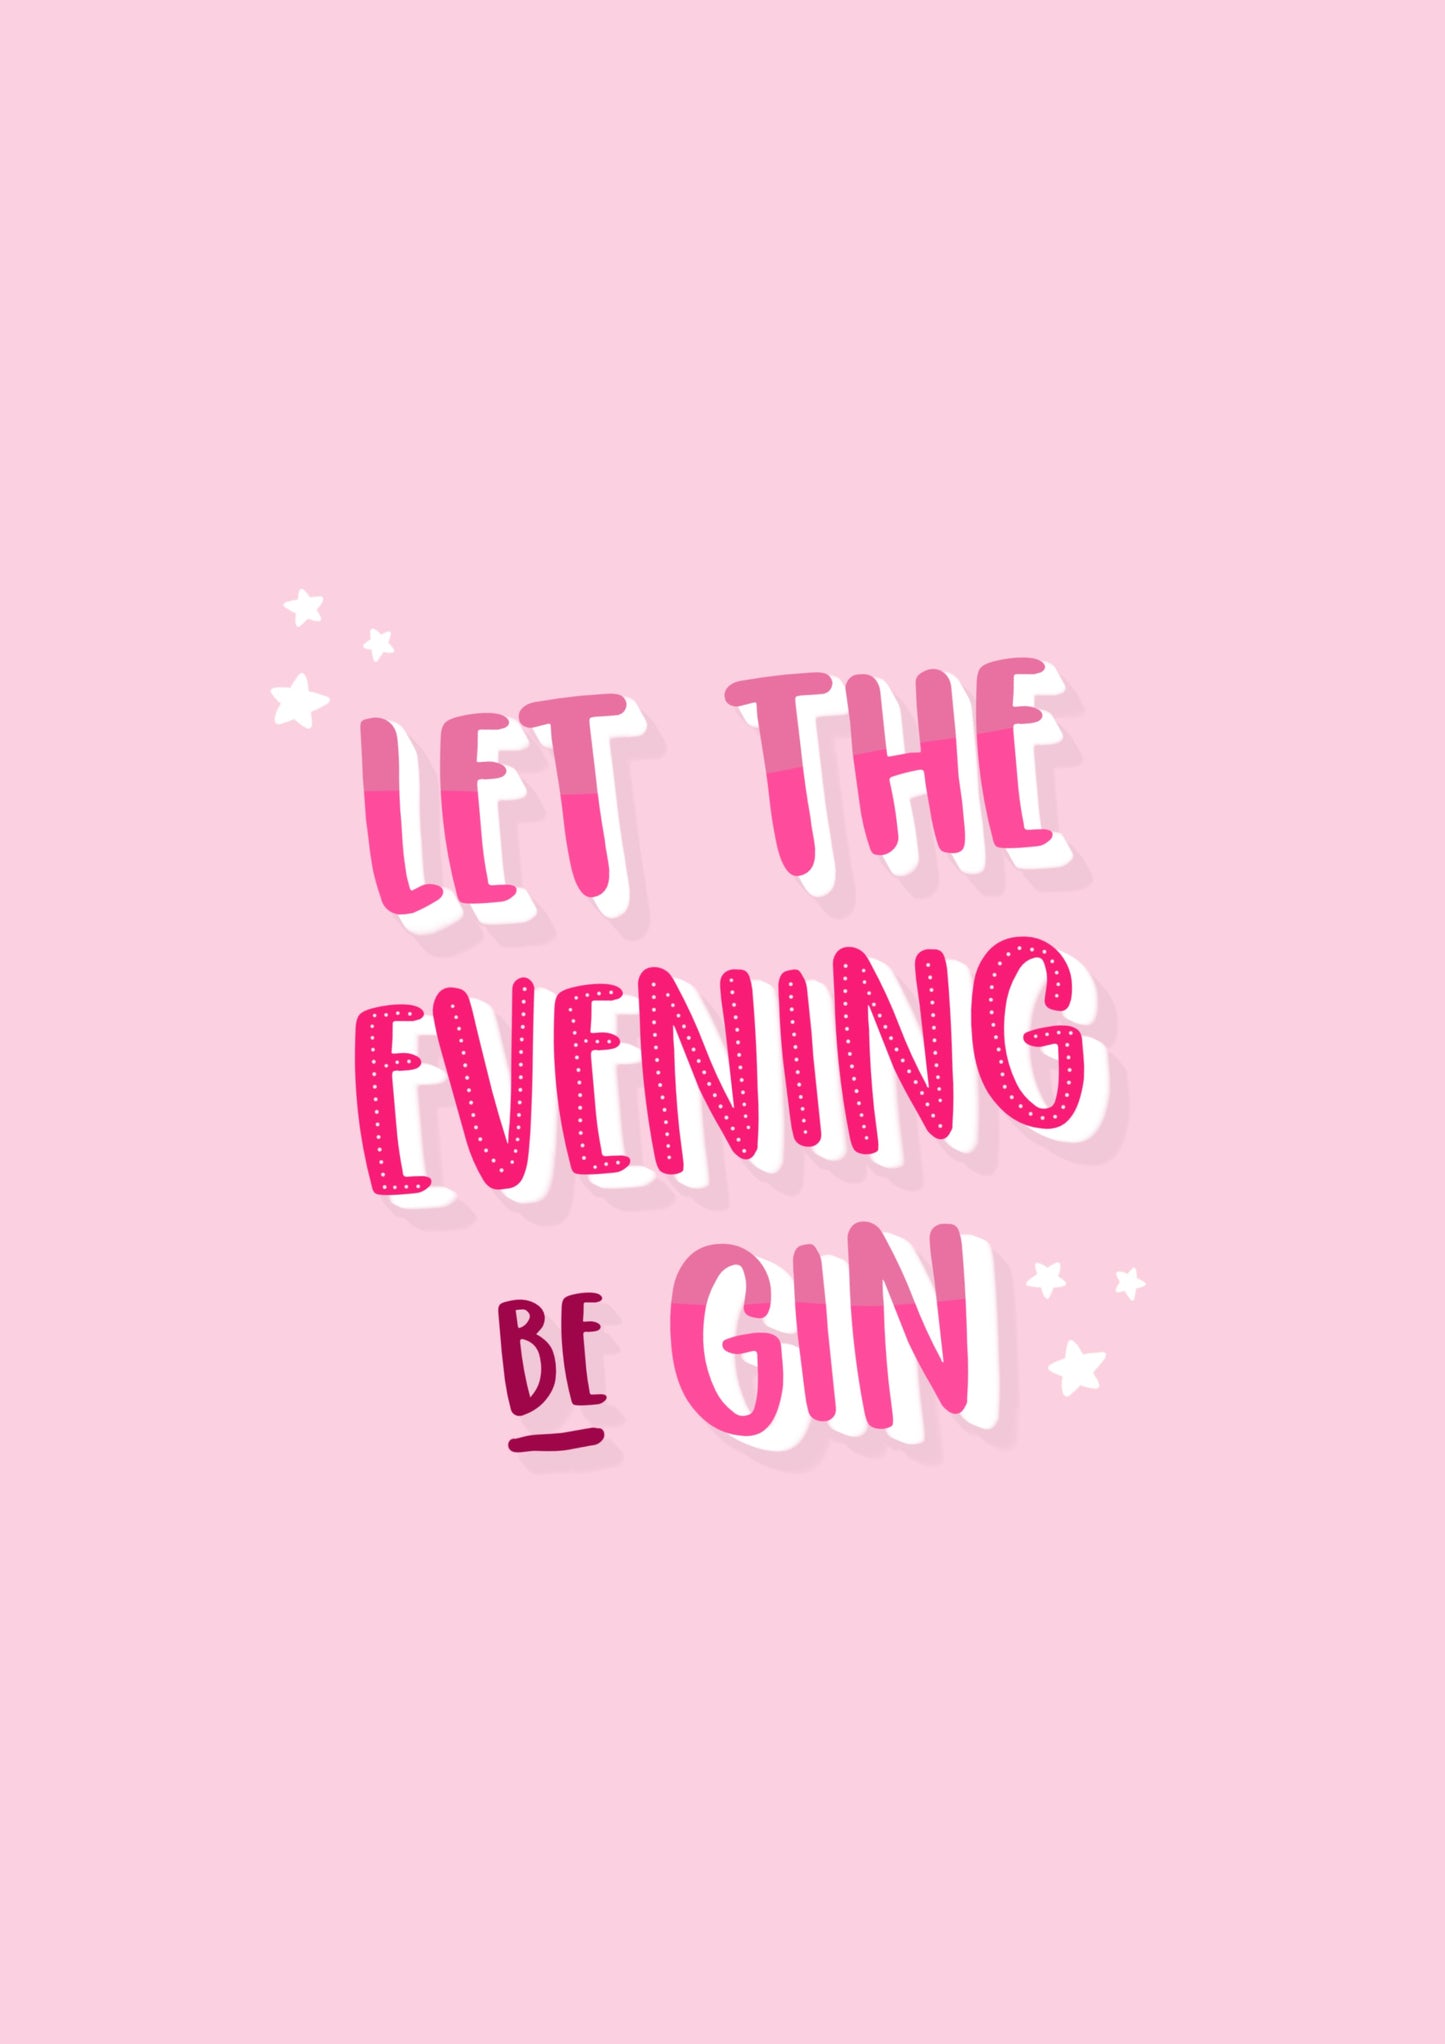 Let The Evening Be Gin | Gin Lover | Alcohol Gift | Funny Quote | Wall Art | Pink | Postcard